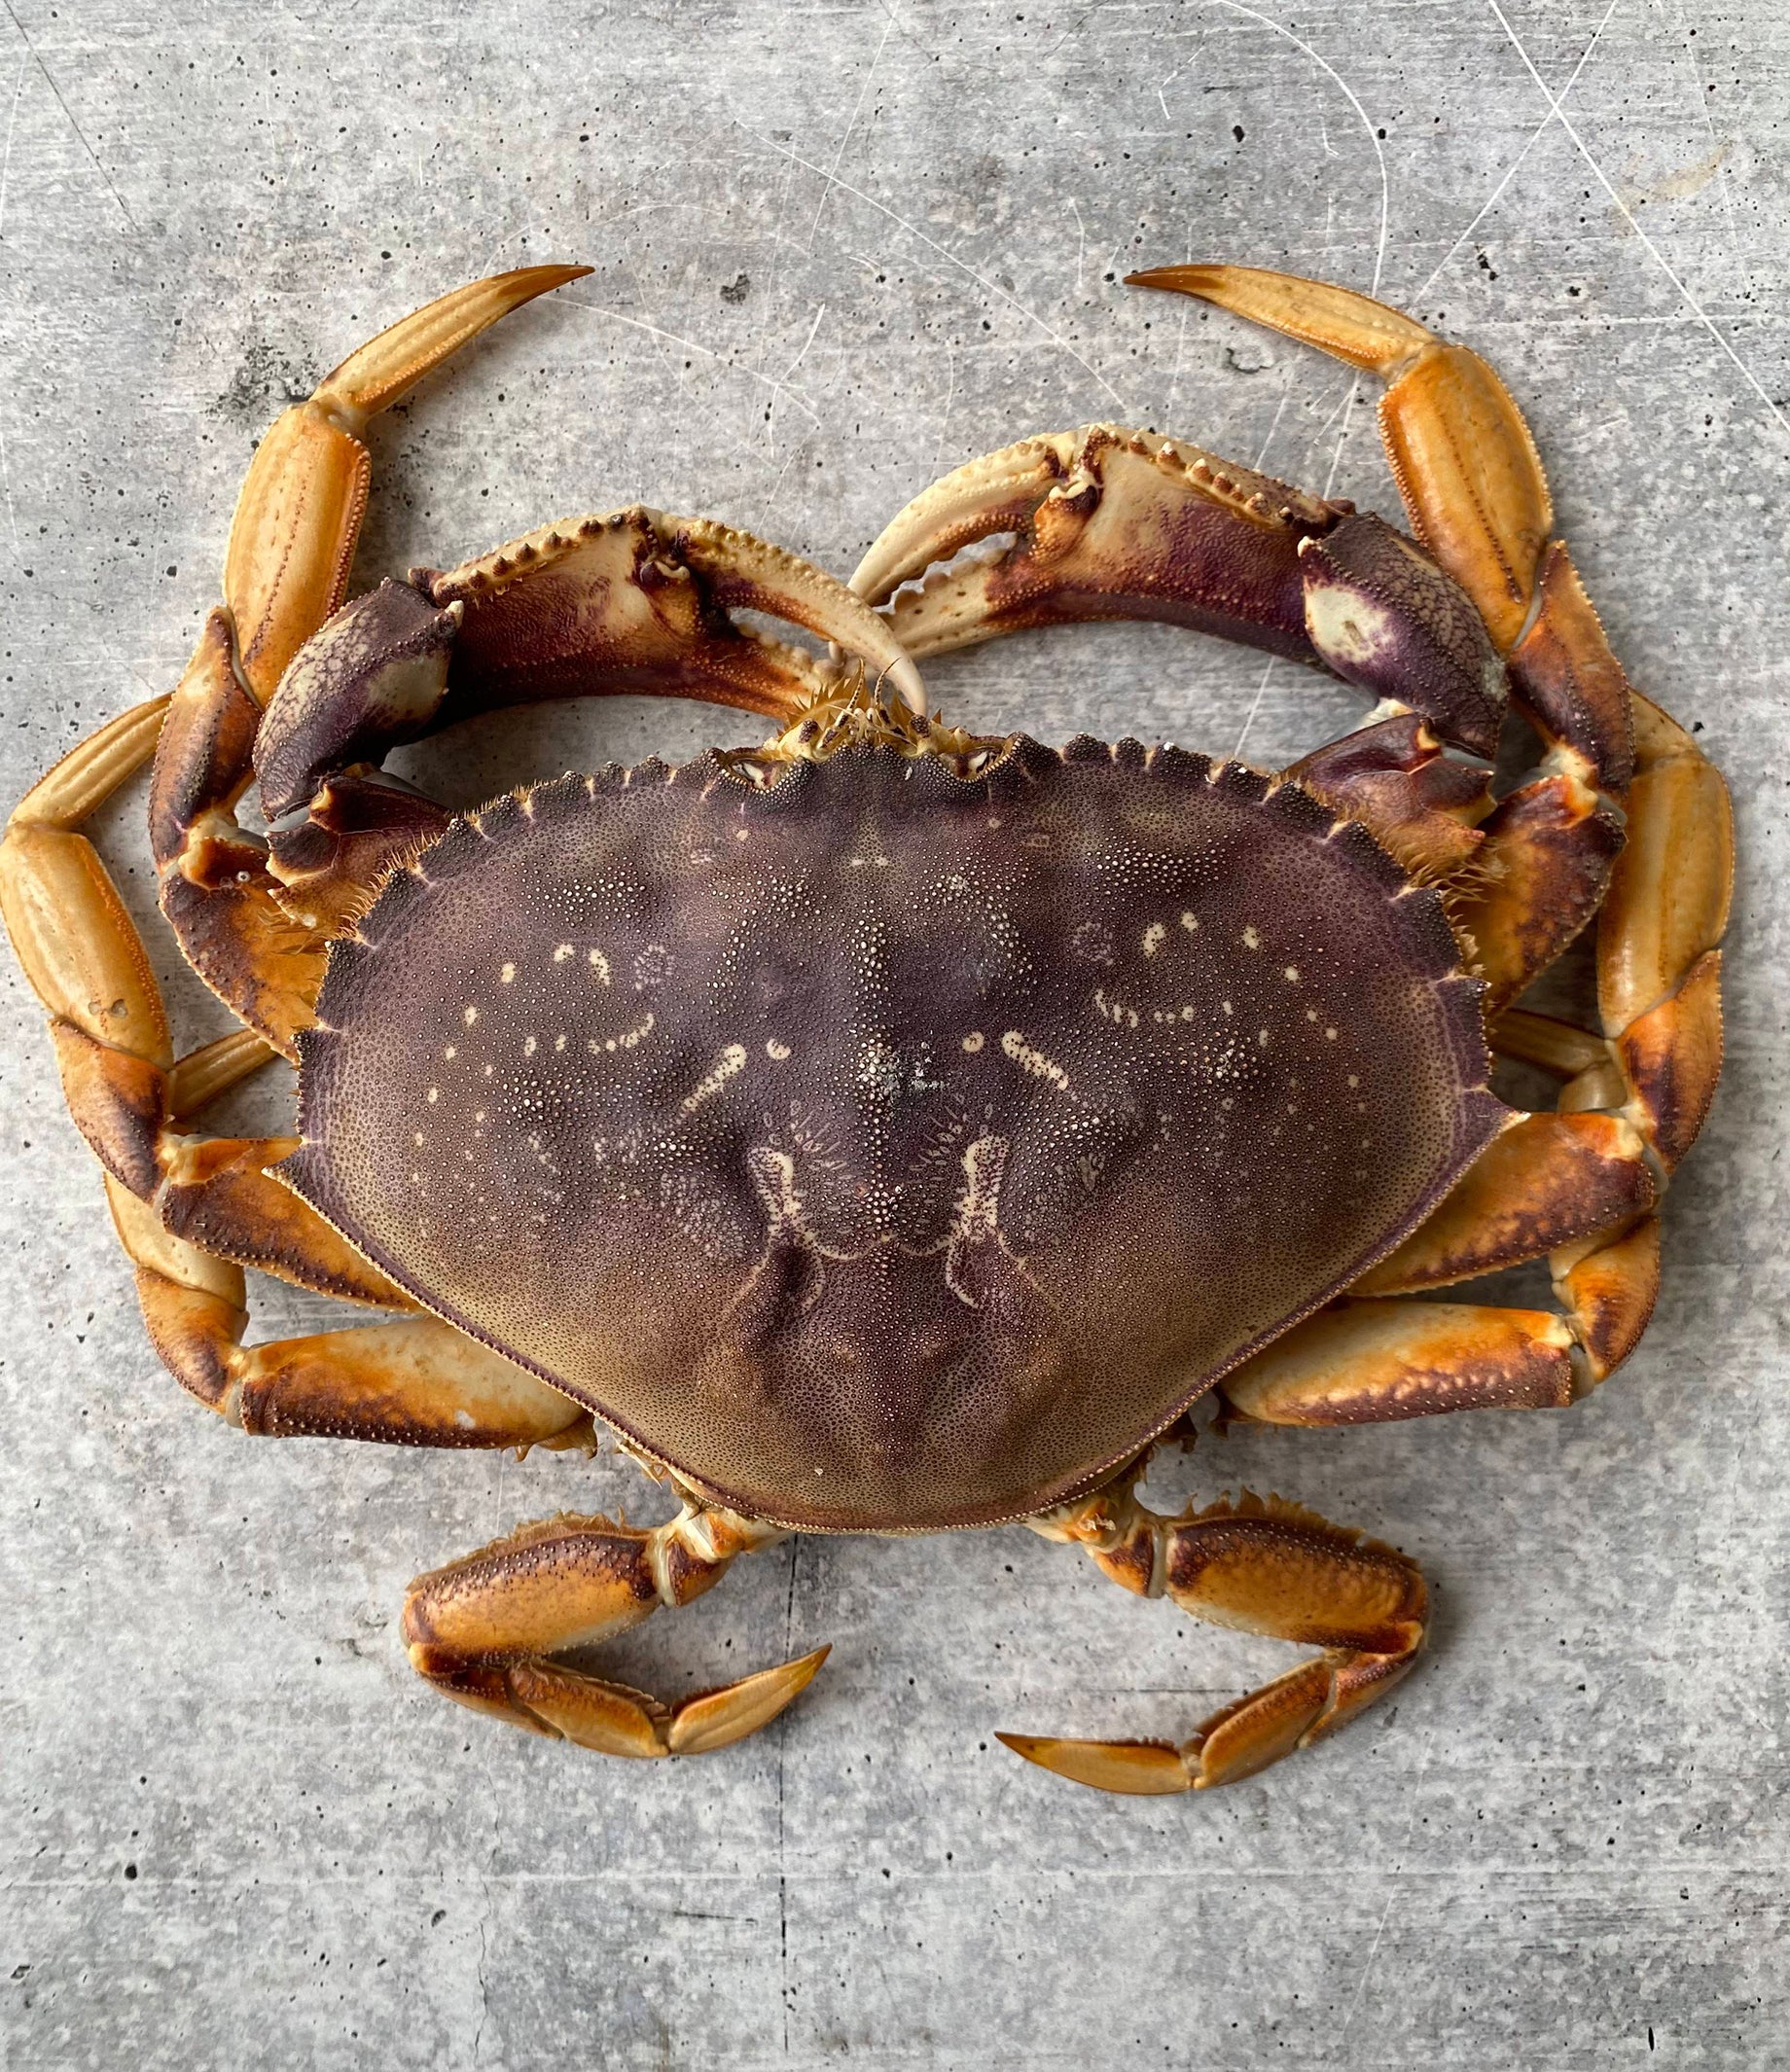 A selection of vibrant live Dungeness crabs, captured just after being sourced from the Pacific waters, highlighting their freshness and quality available at GlobalSeafoods.com